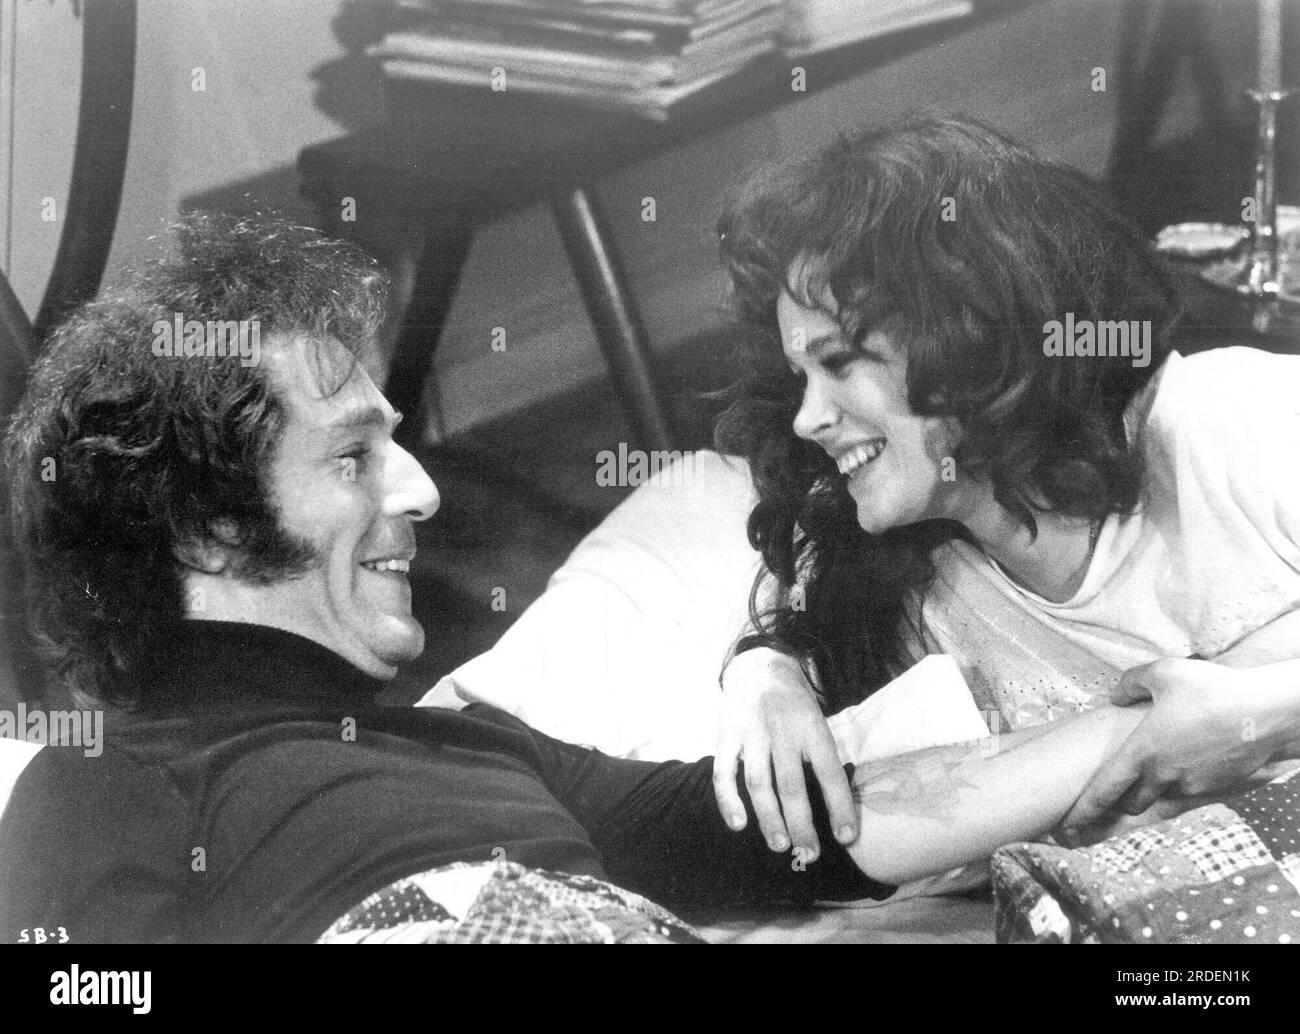 GEORGE SEGAL and PAULA PRENTISS in BORN TO WIN (1971), directed by IVAN PASSER. Credit: Edward Spector Productions Inc. / Album Stock Photo